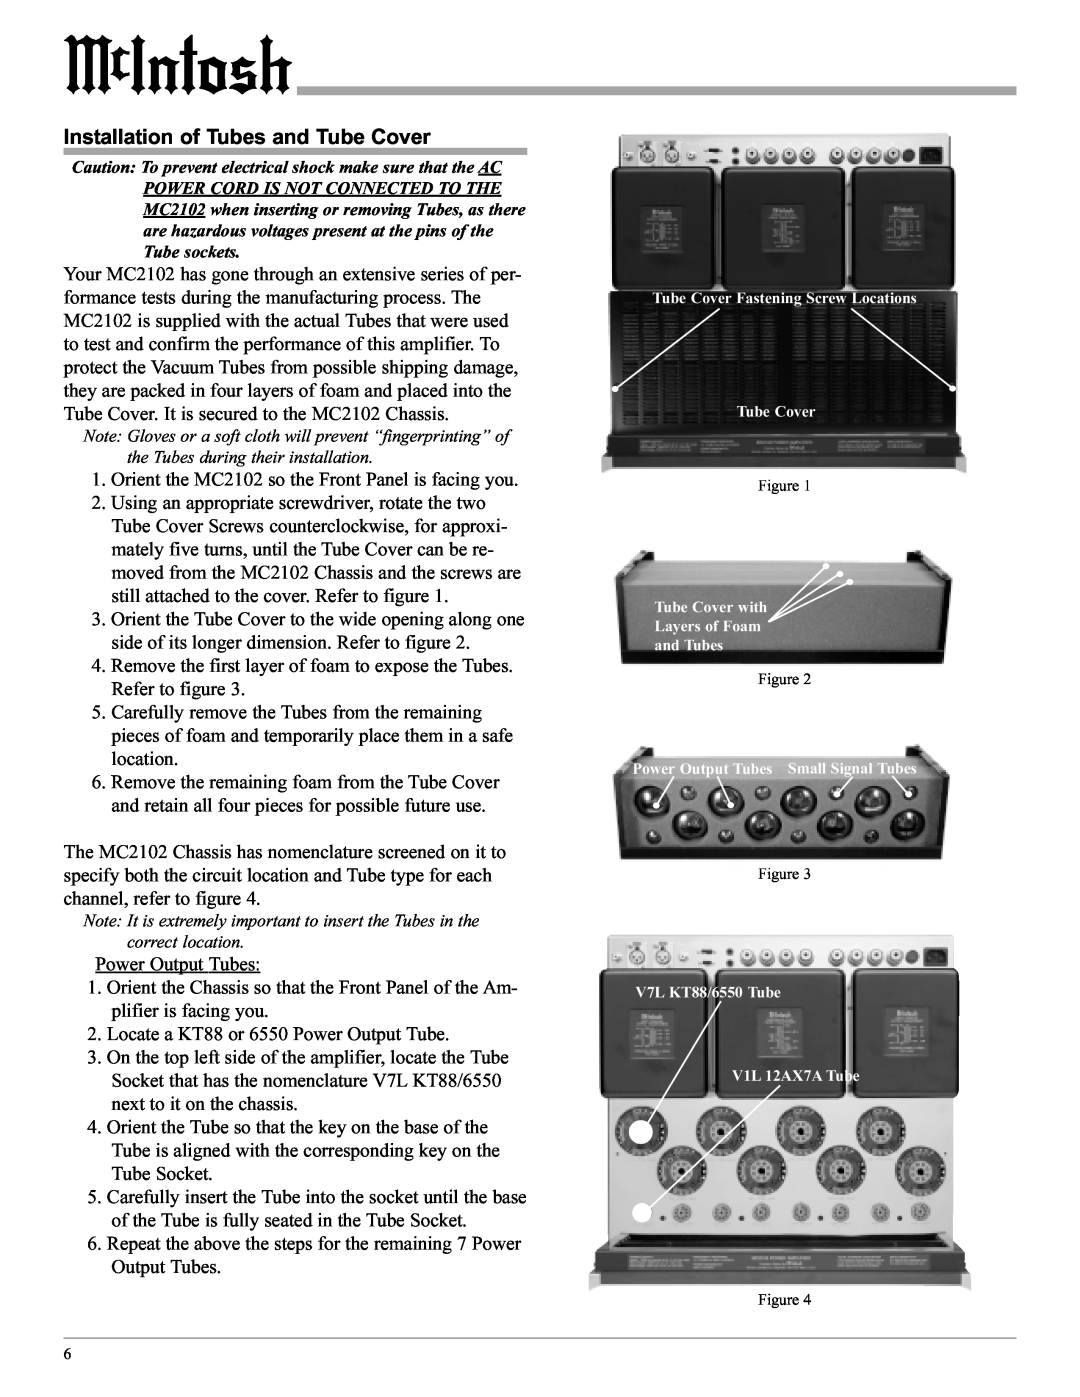 McIntosh MC2102 manual Installation of Tubes and Tube Cover 